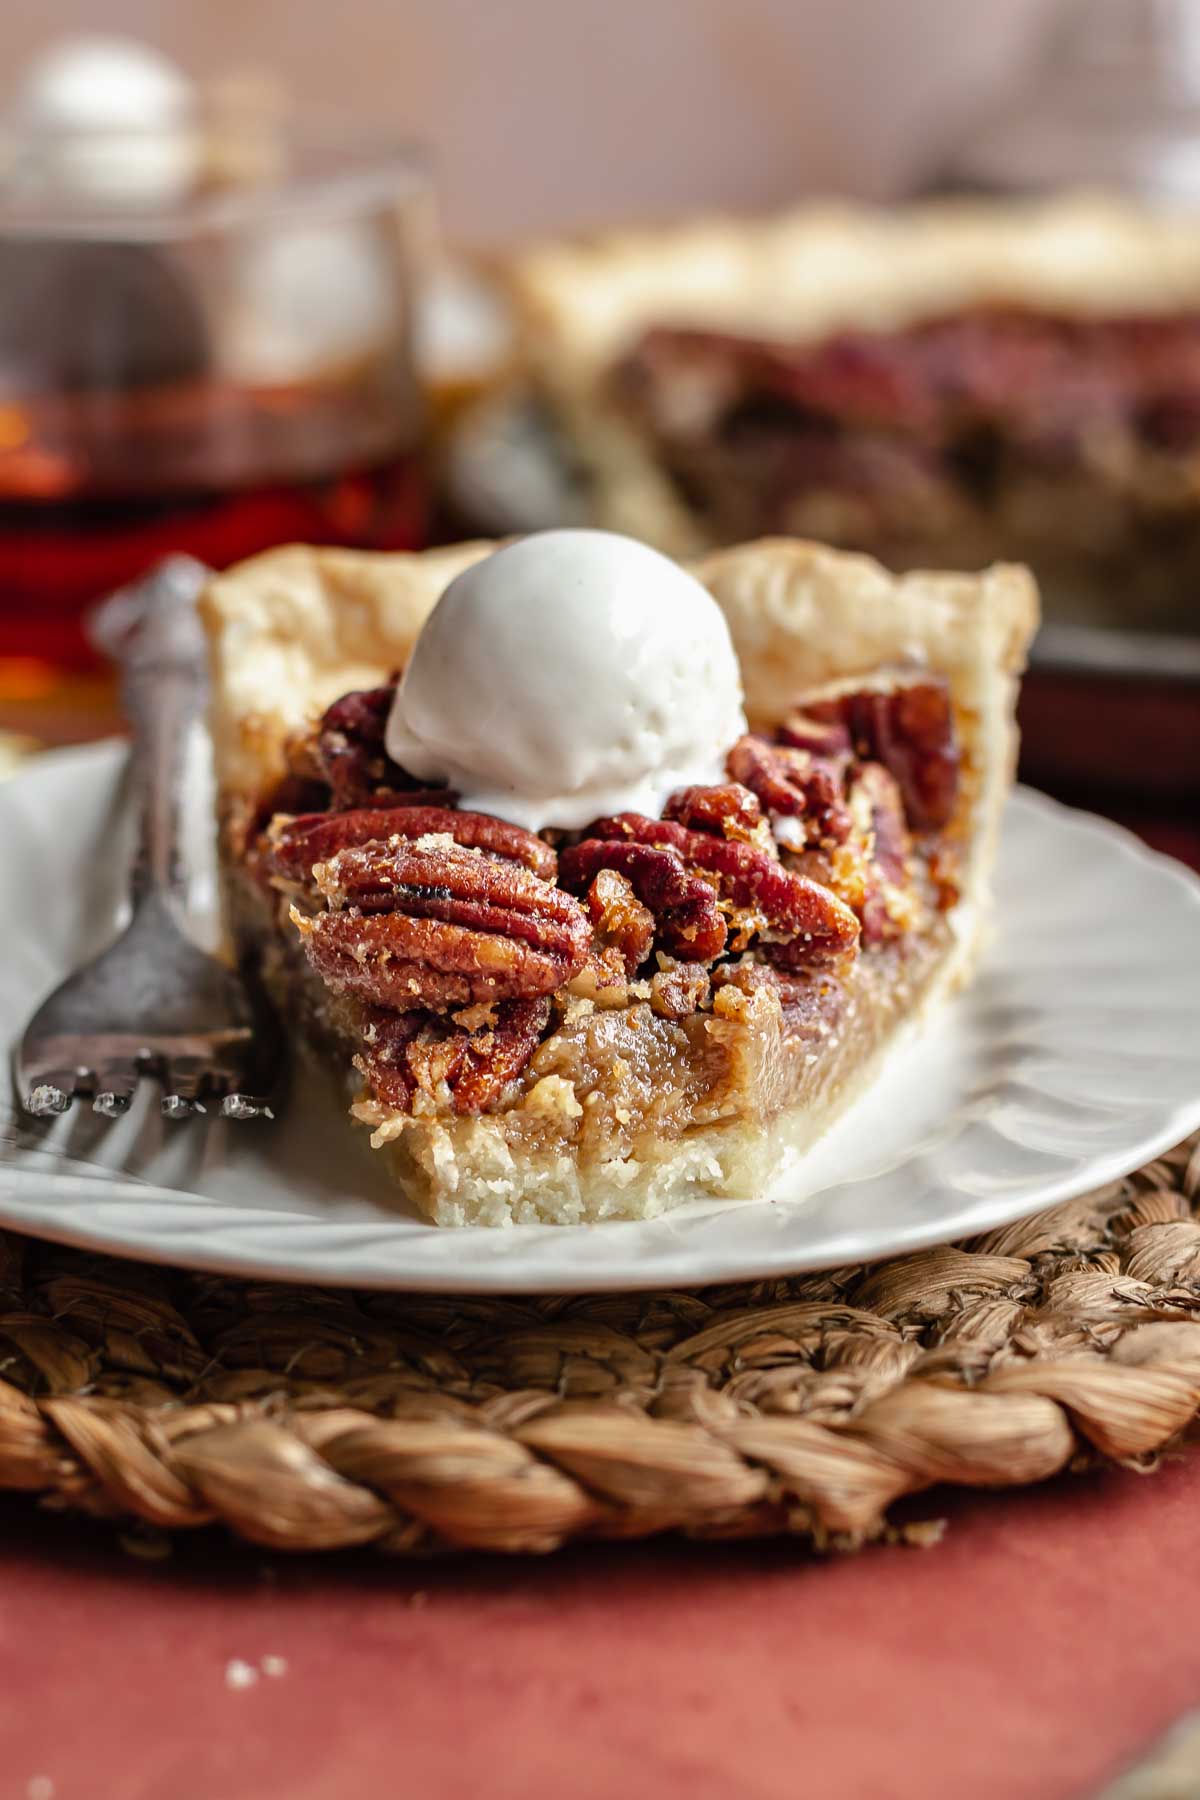 A slice of pecan pie with ice cream on top. The front bite is removed.